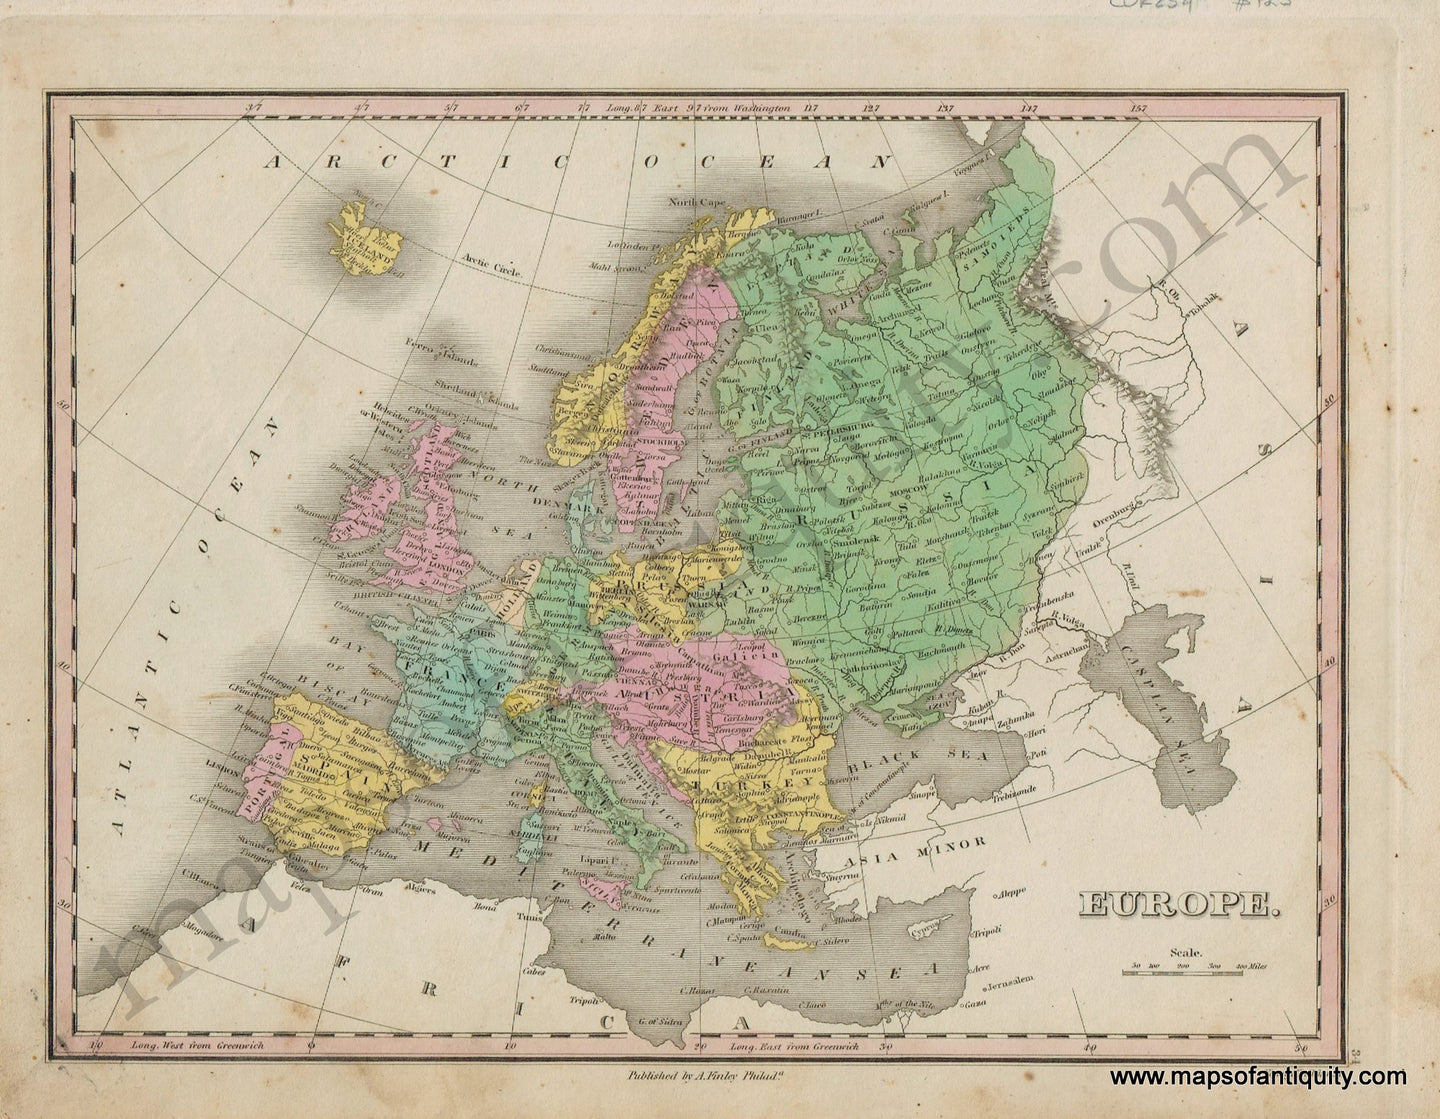 Antique-Map-Europe-Finley-1820s-1800s-Early-19th-Century-Maps-of-Antiquity